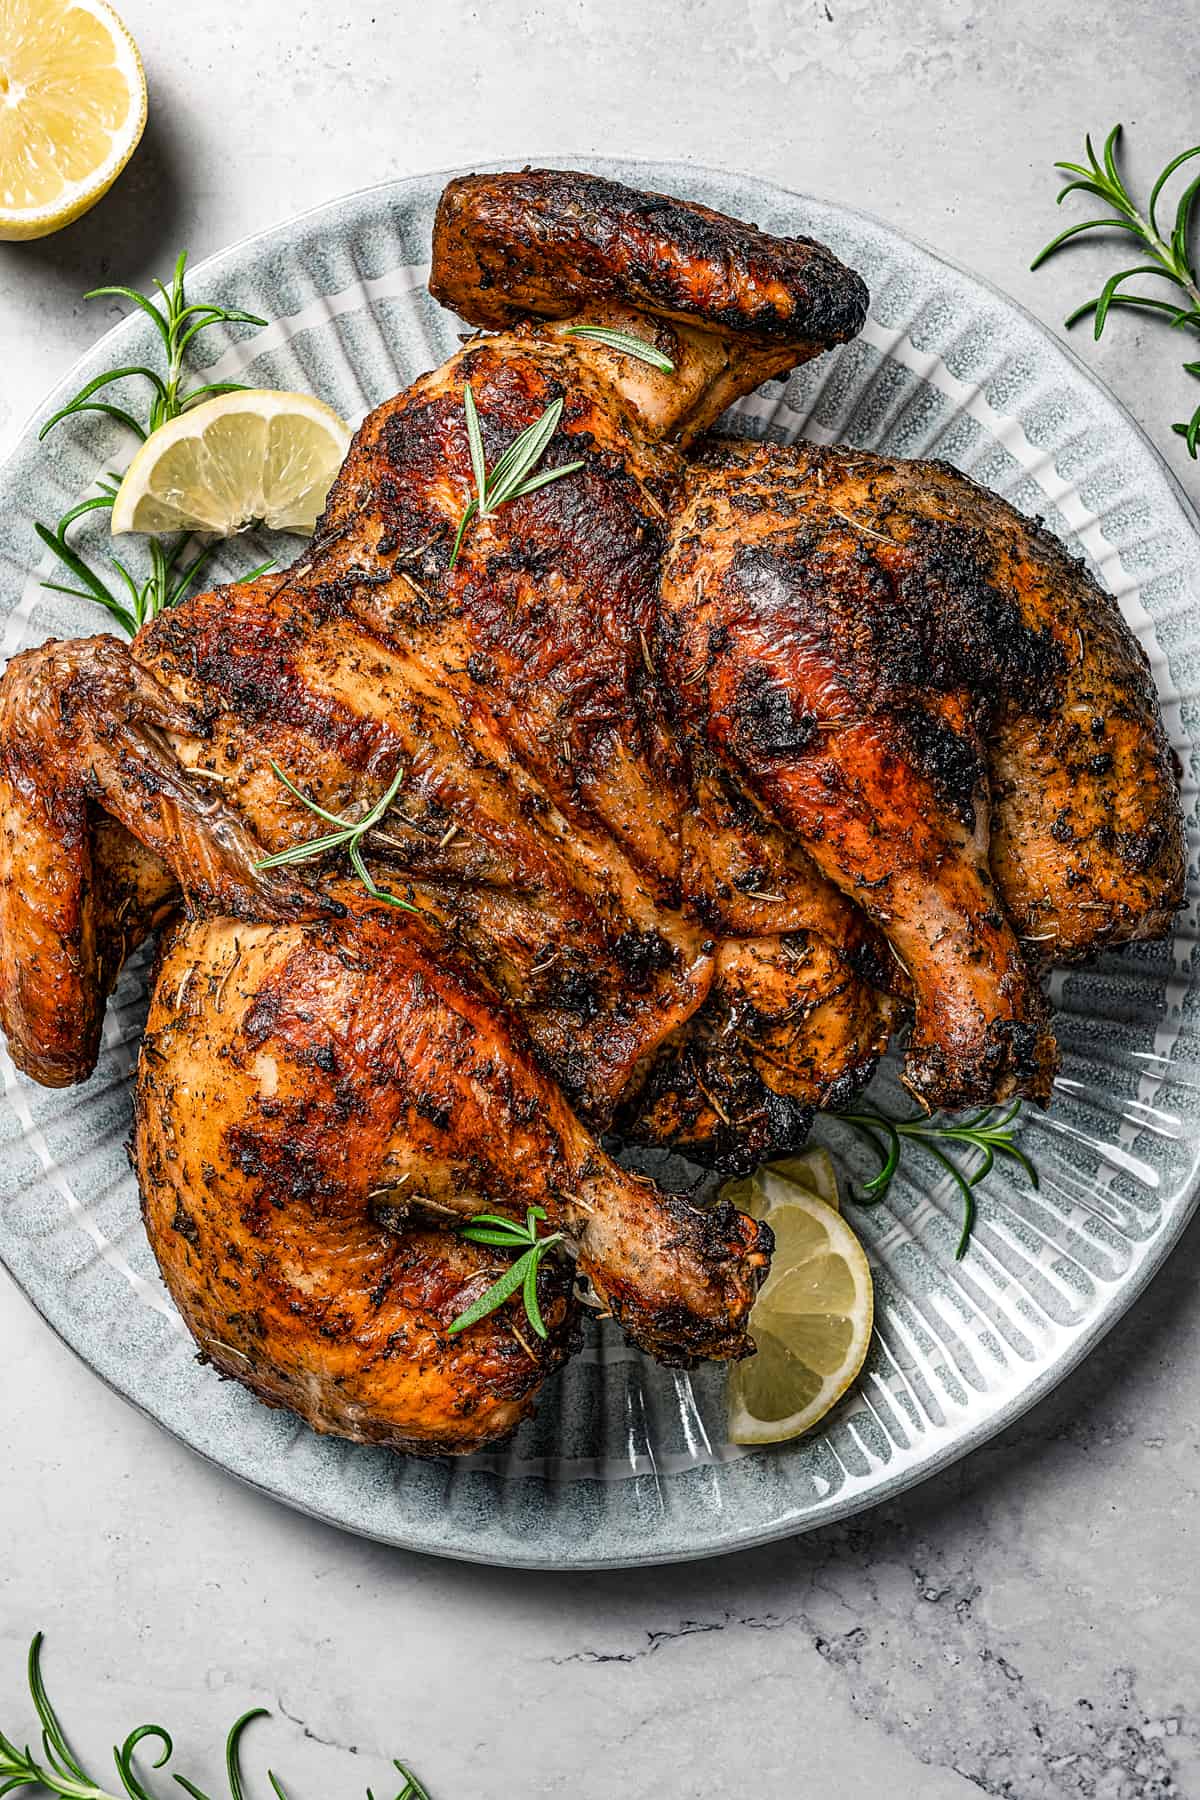 Spatchcock grilled chicken garnished with rosemary and lemon.